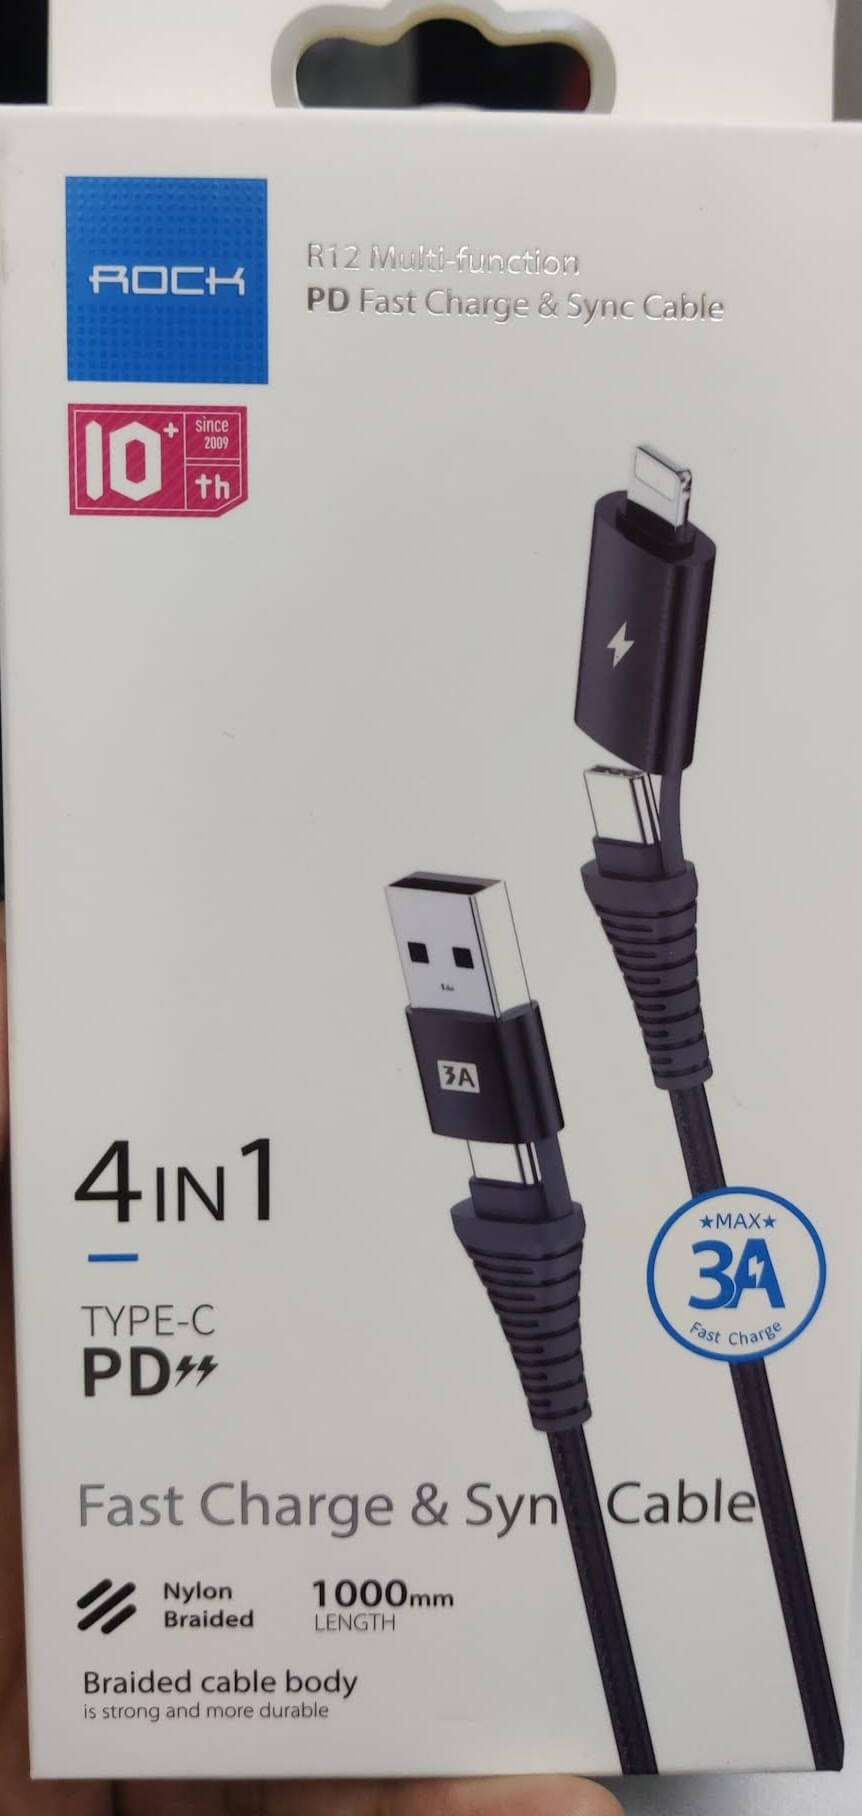 Original Rock R12 Multi-Function 4 IN 1 PD Fast Charge & Sync Cable